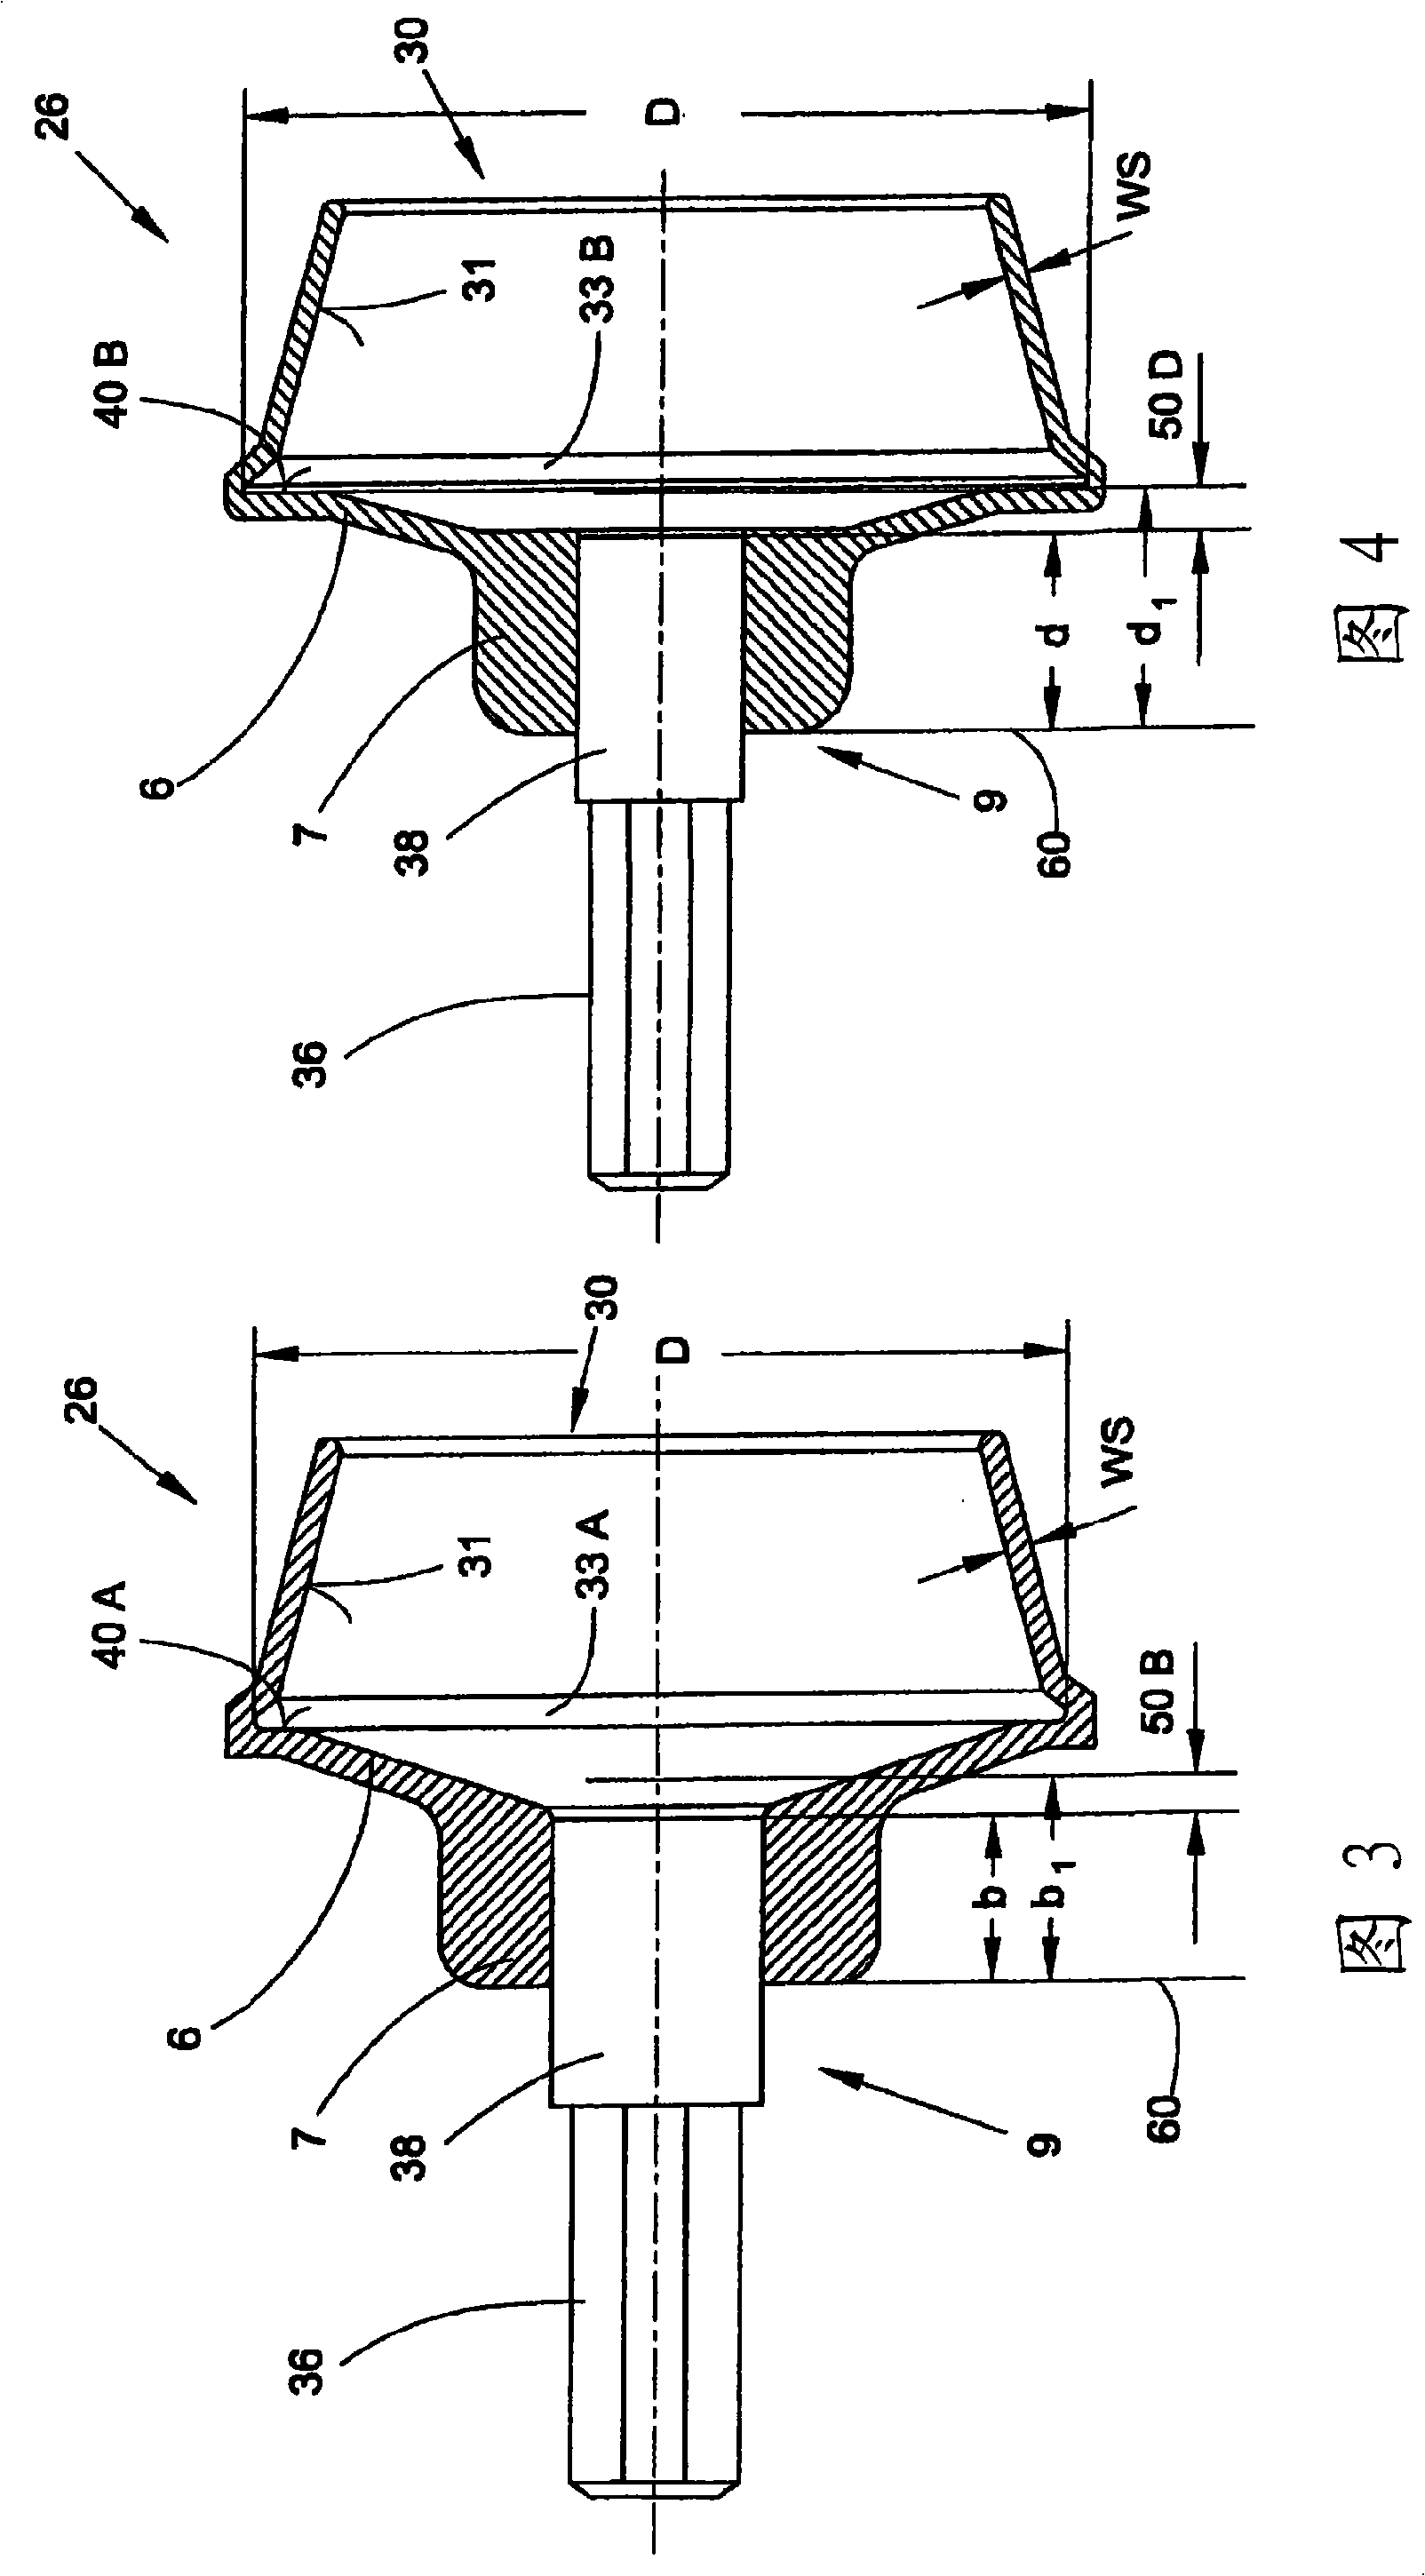 Open-end spinning rotor for textile machine producing cross-wound packages